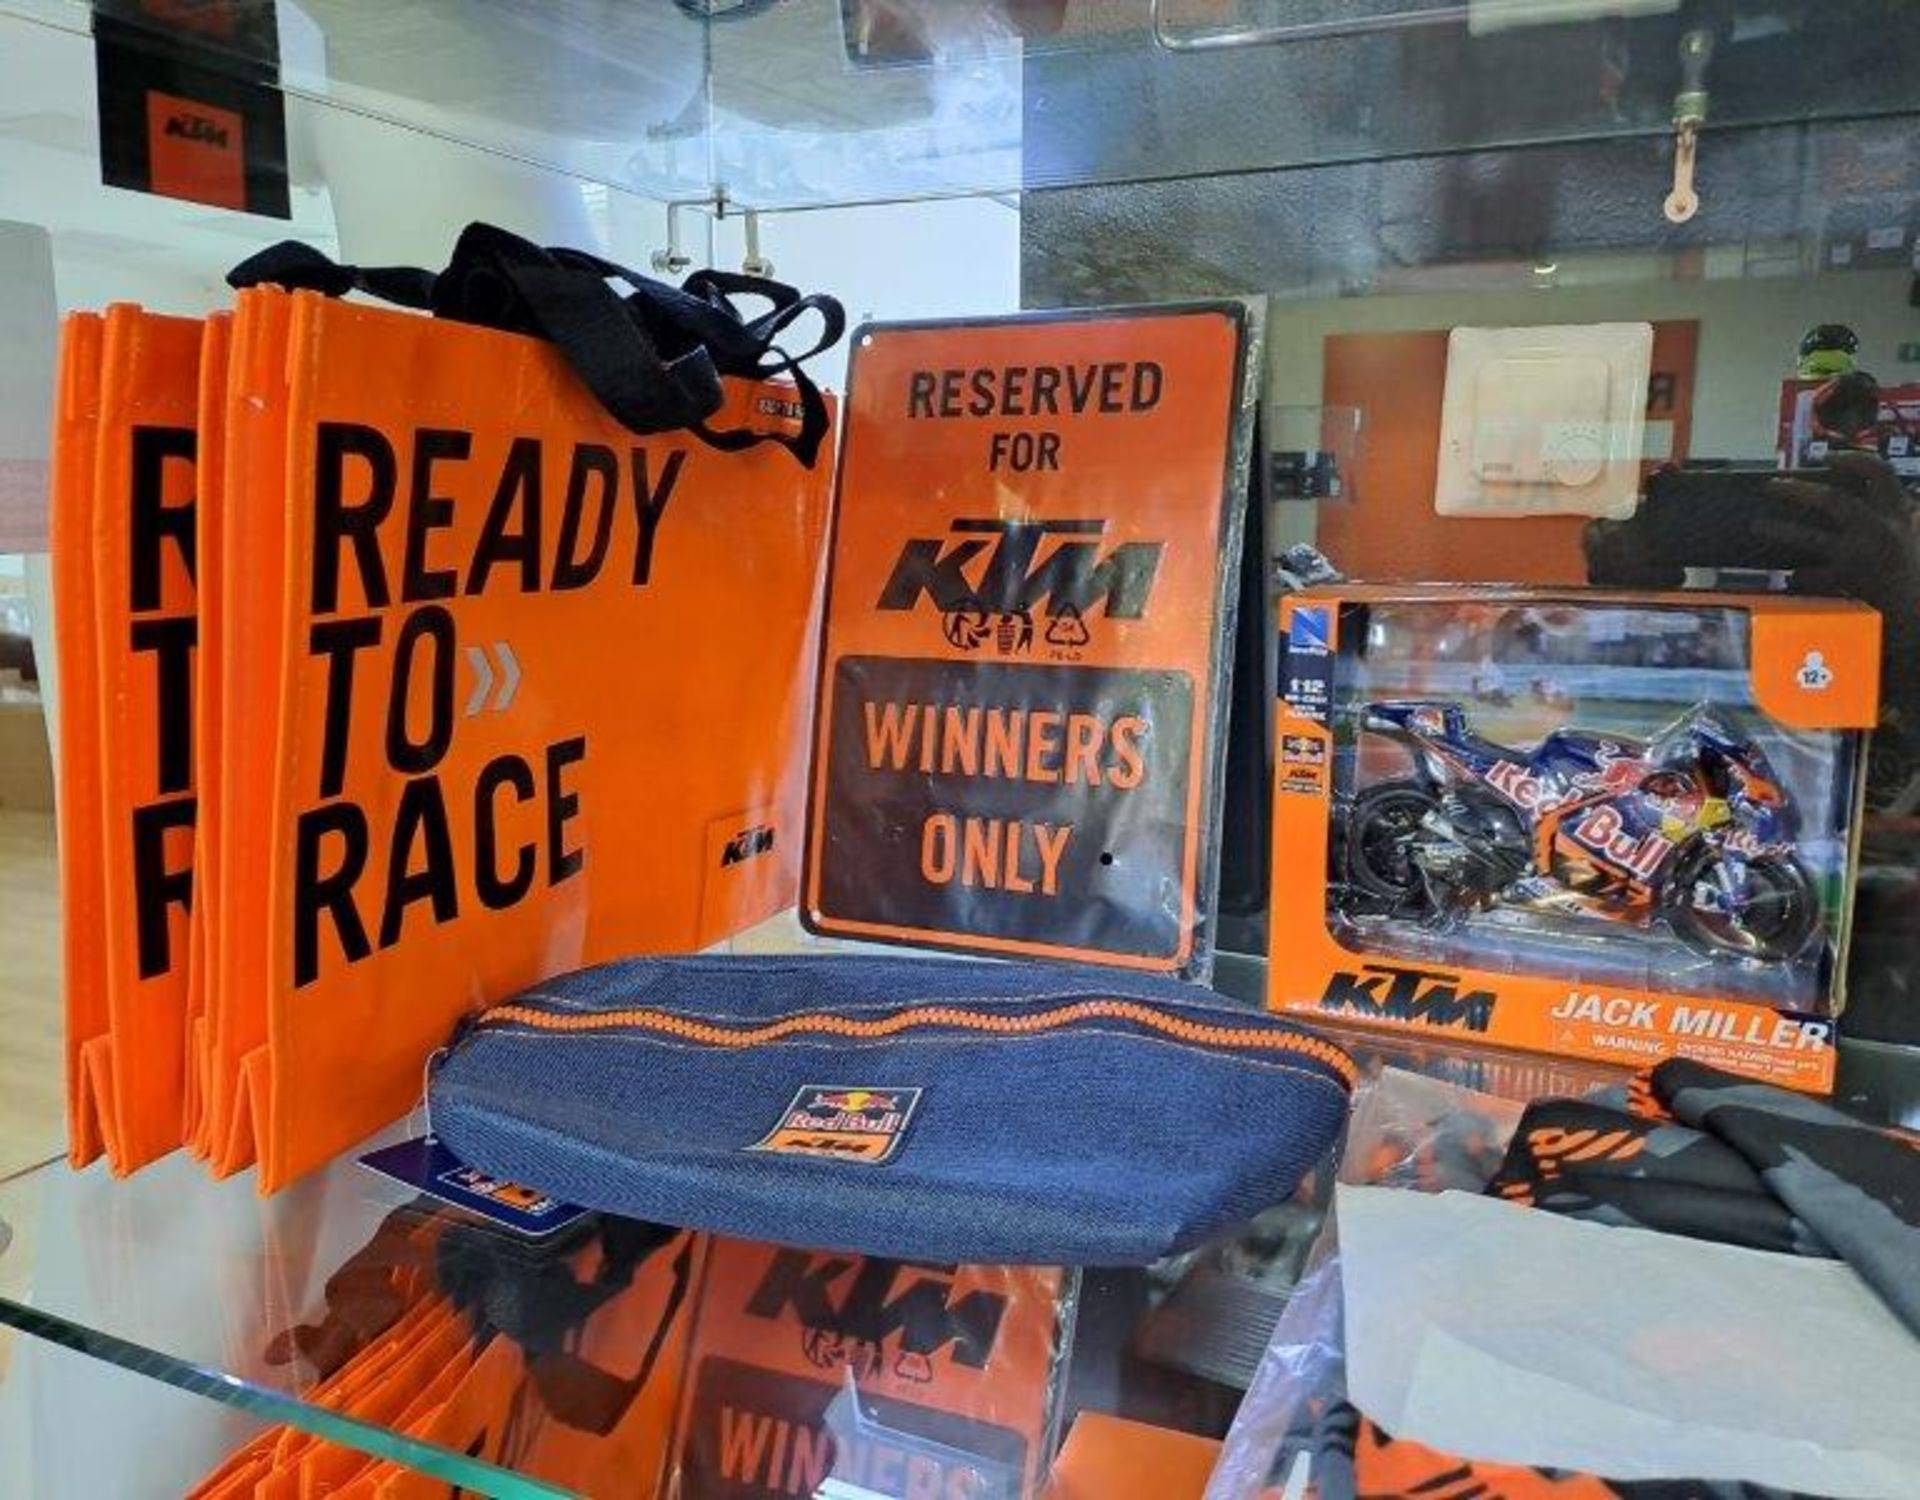 Contents of shelf of KTM Merchandise as pictured - Image 3 of 5